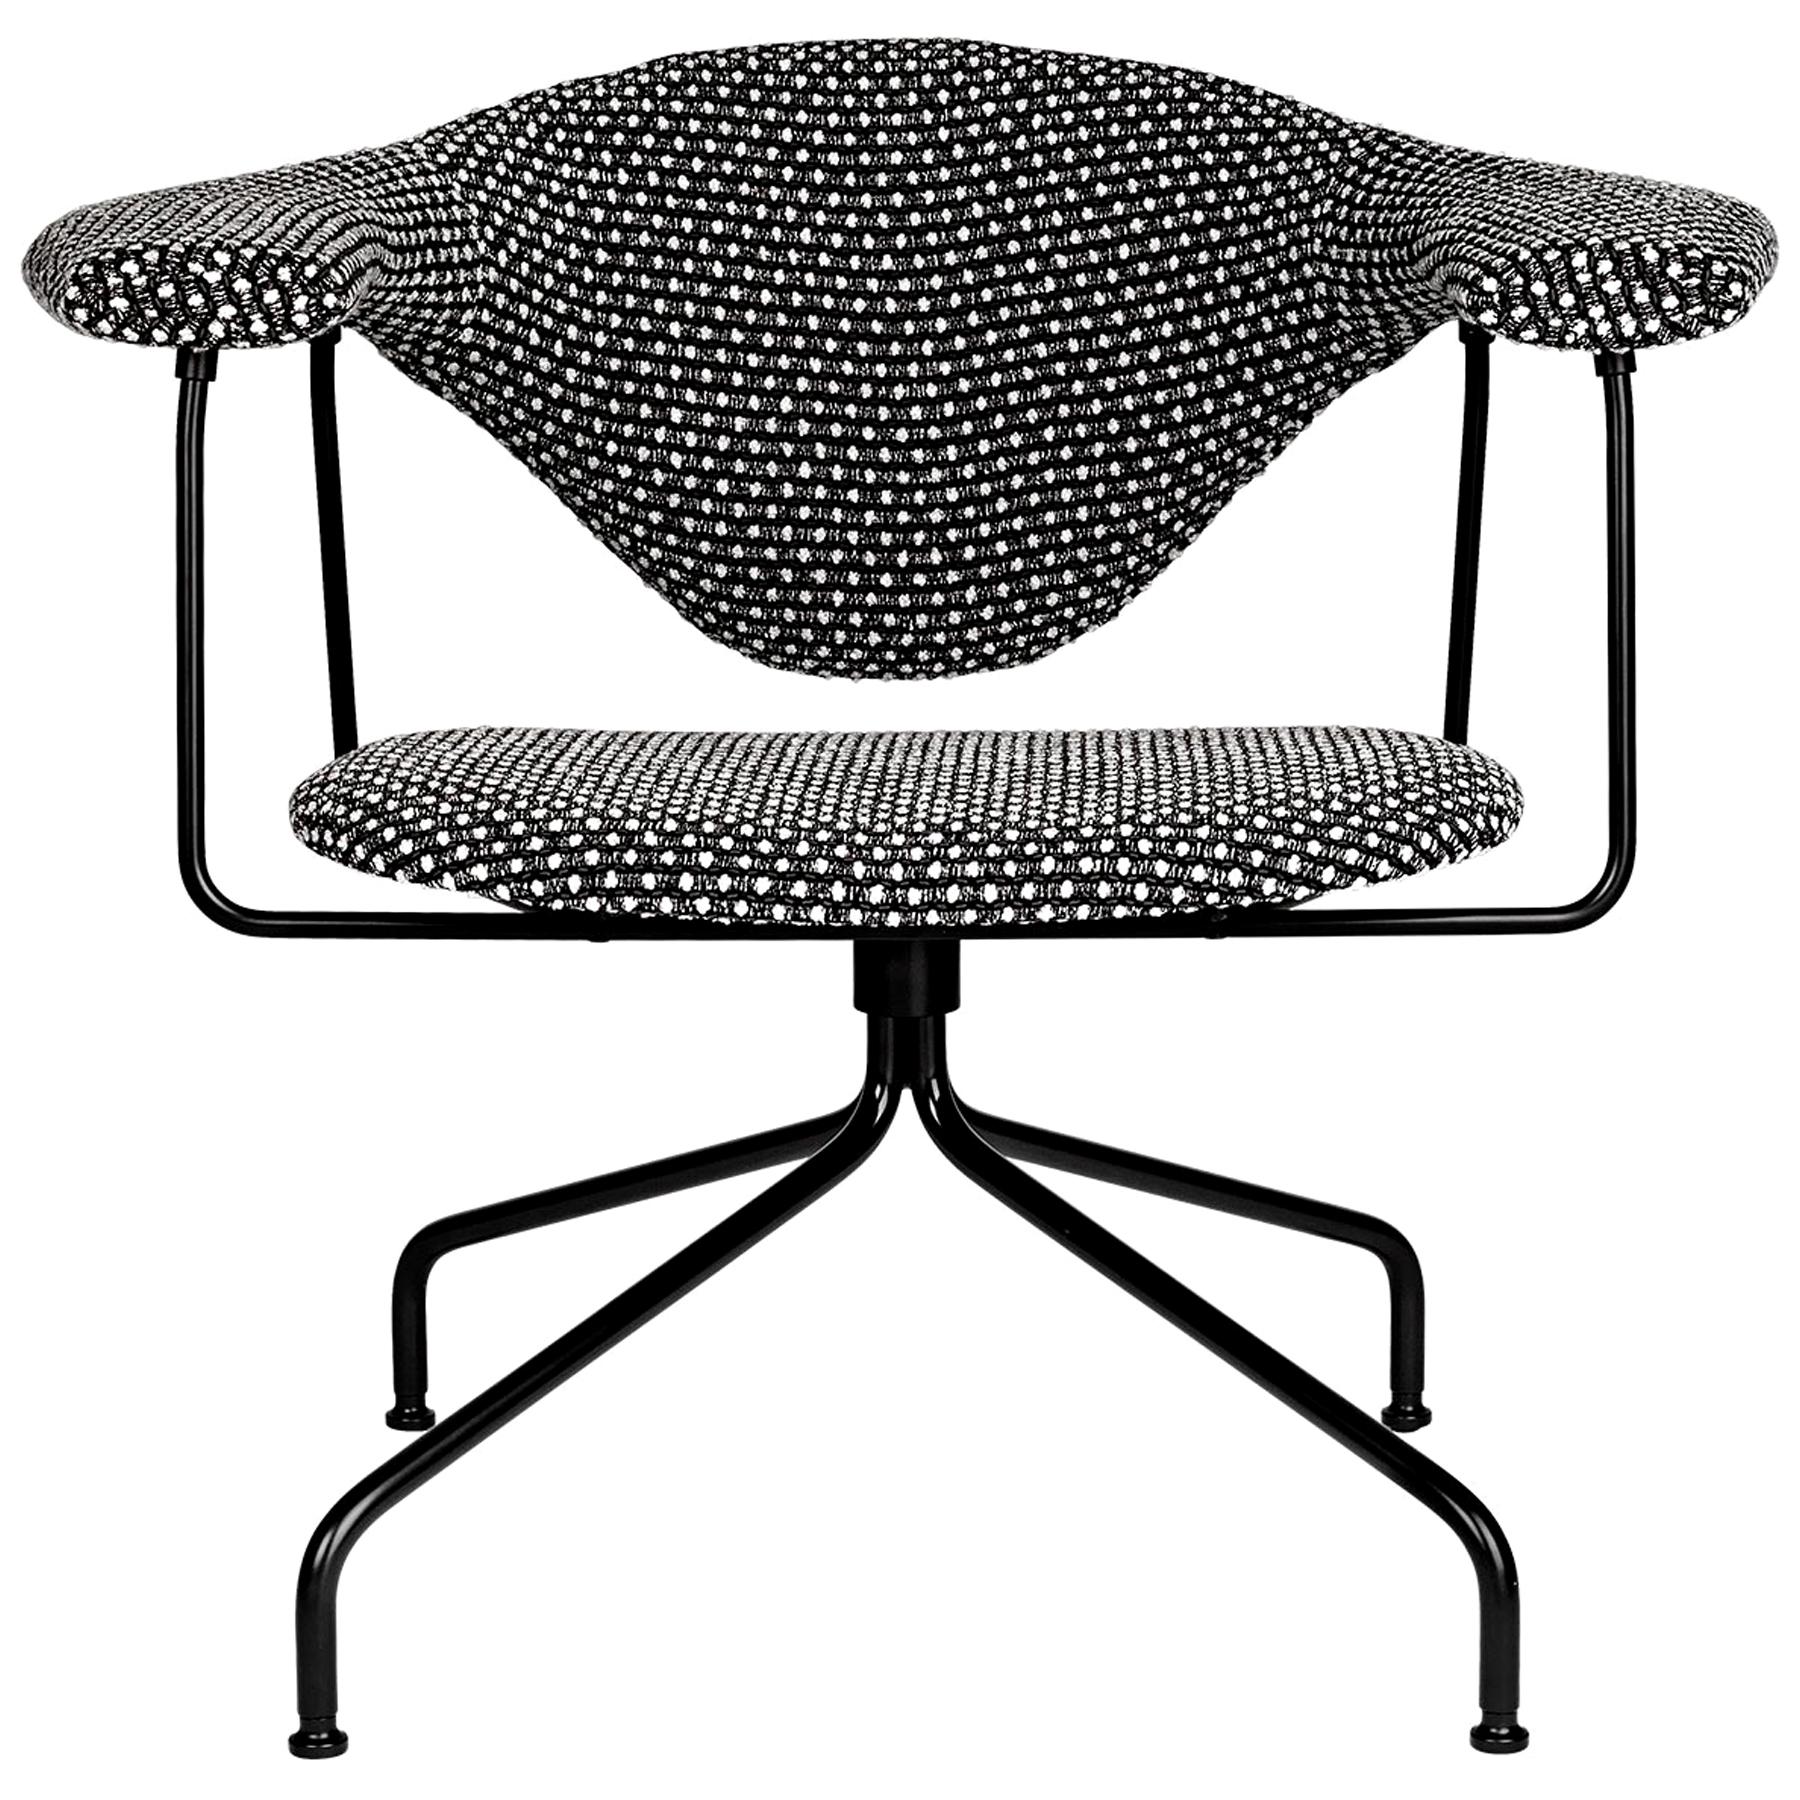 Masculo Lounge Chair, Swivel Base For Sale